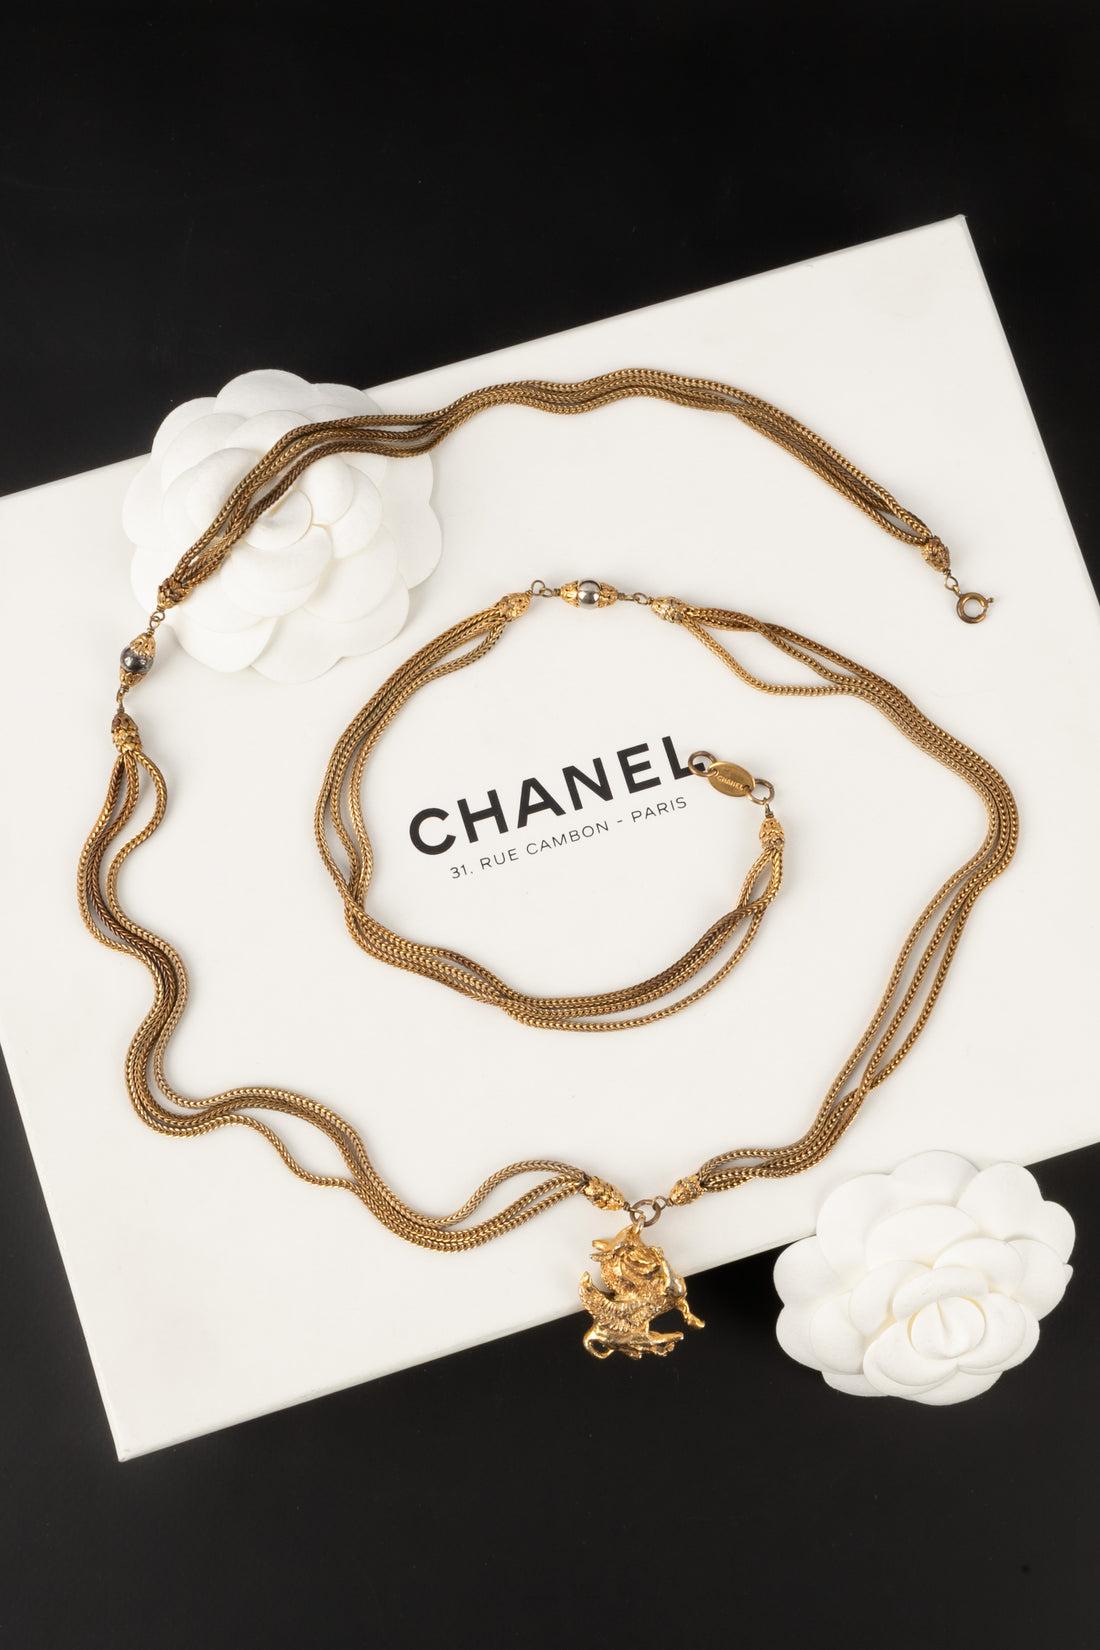 Chanel - (Made in France) Golden metal Haute Couture necklace with a pendant representing a Pegasus. Jewelry from the Coco Chanel era.

Additional information:
Condition: Very good condition
Dimensions: Length: 96 cm

Seller Reference: CB281